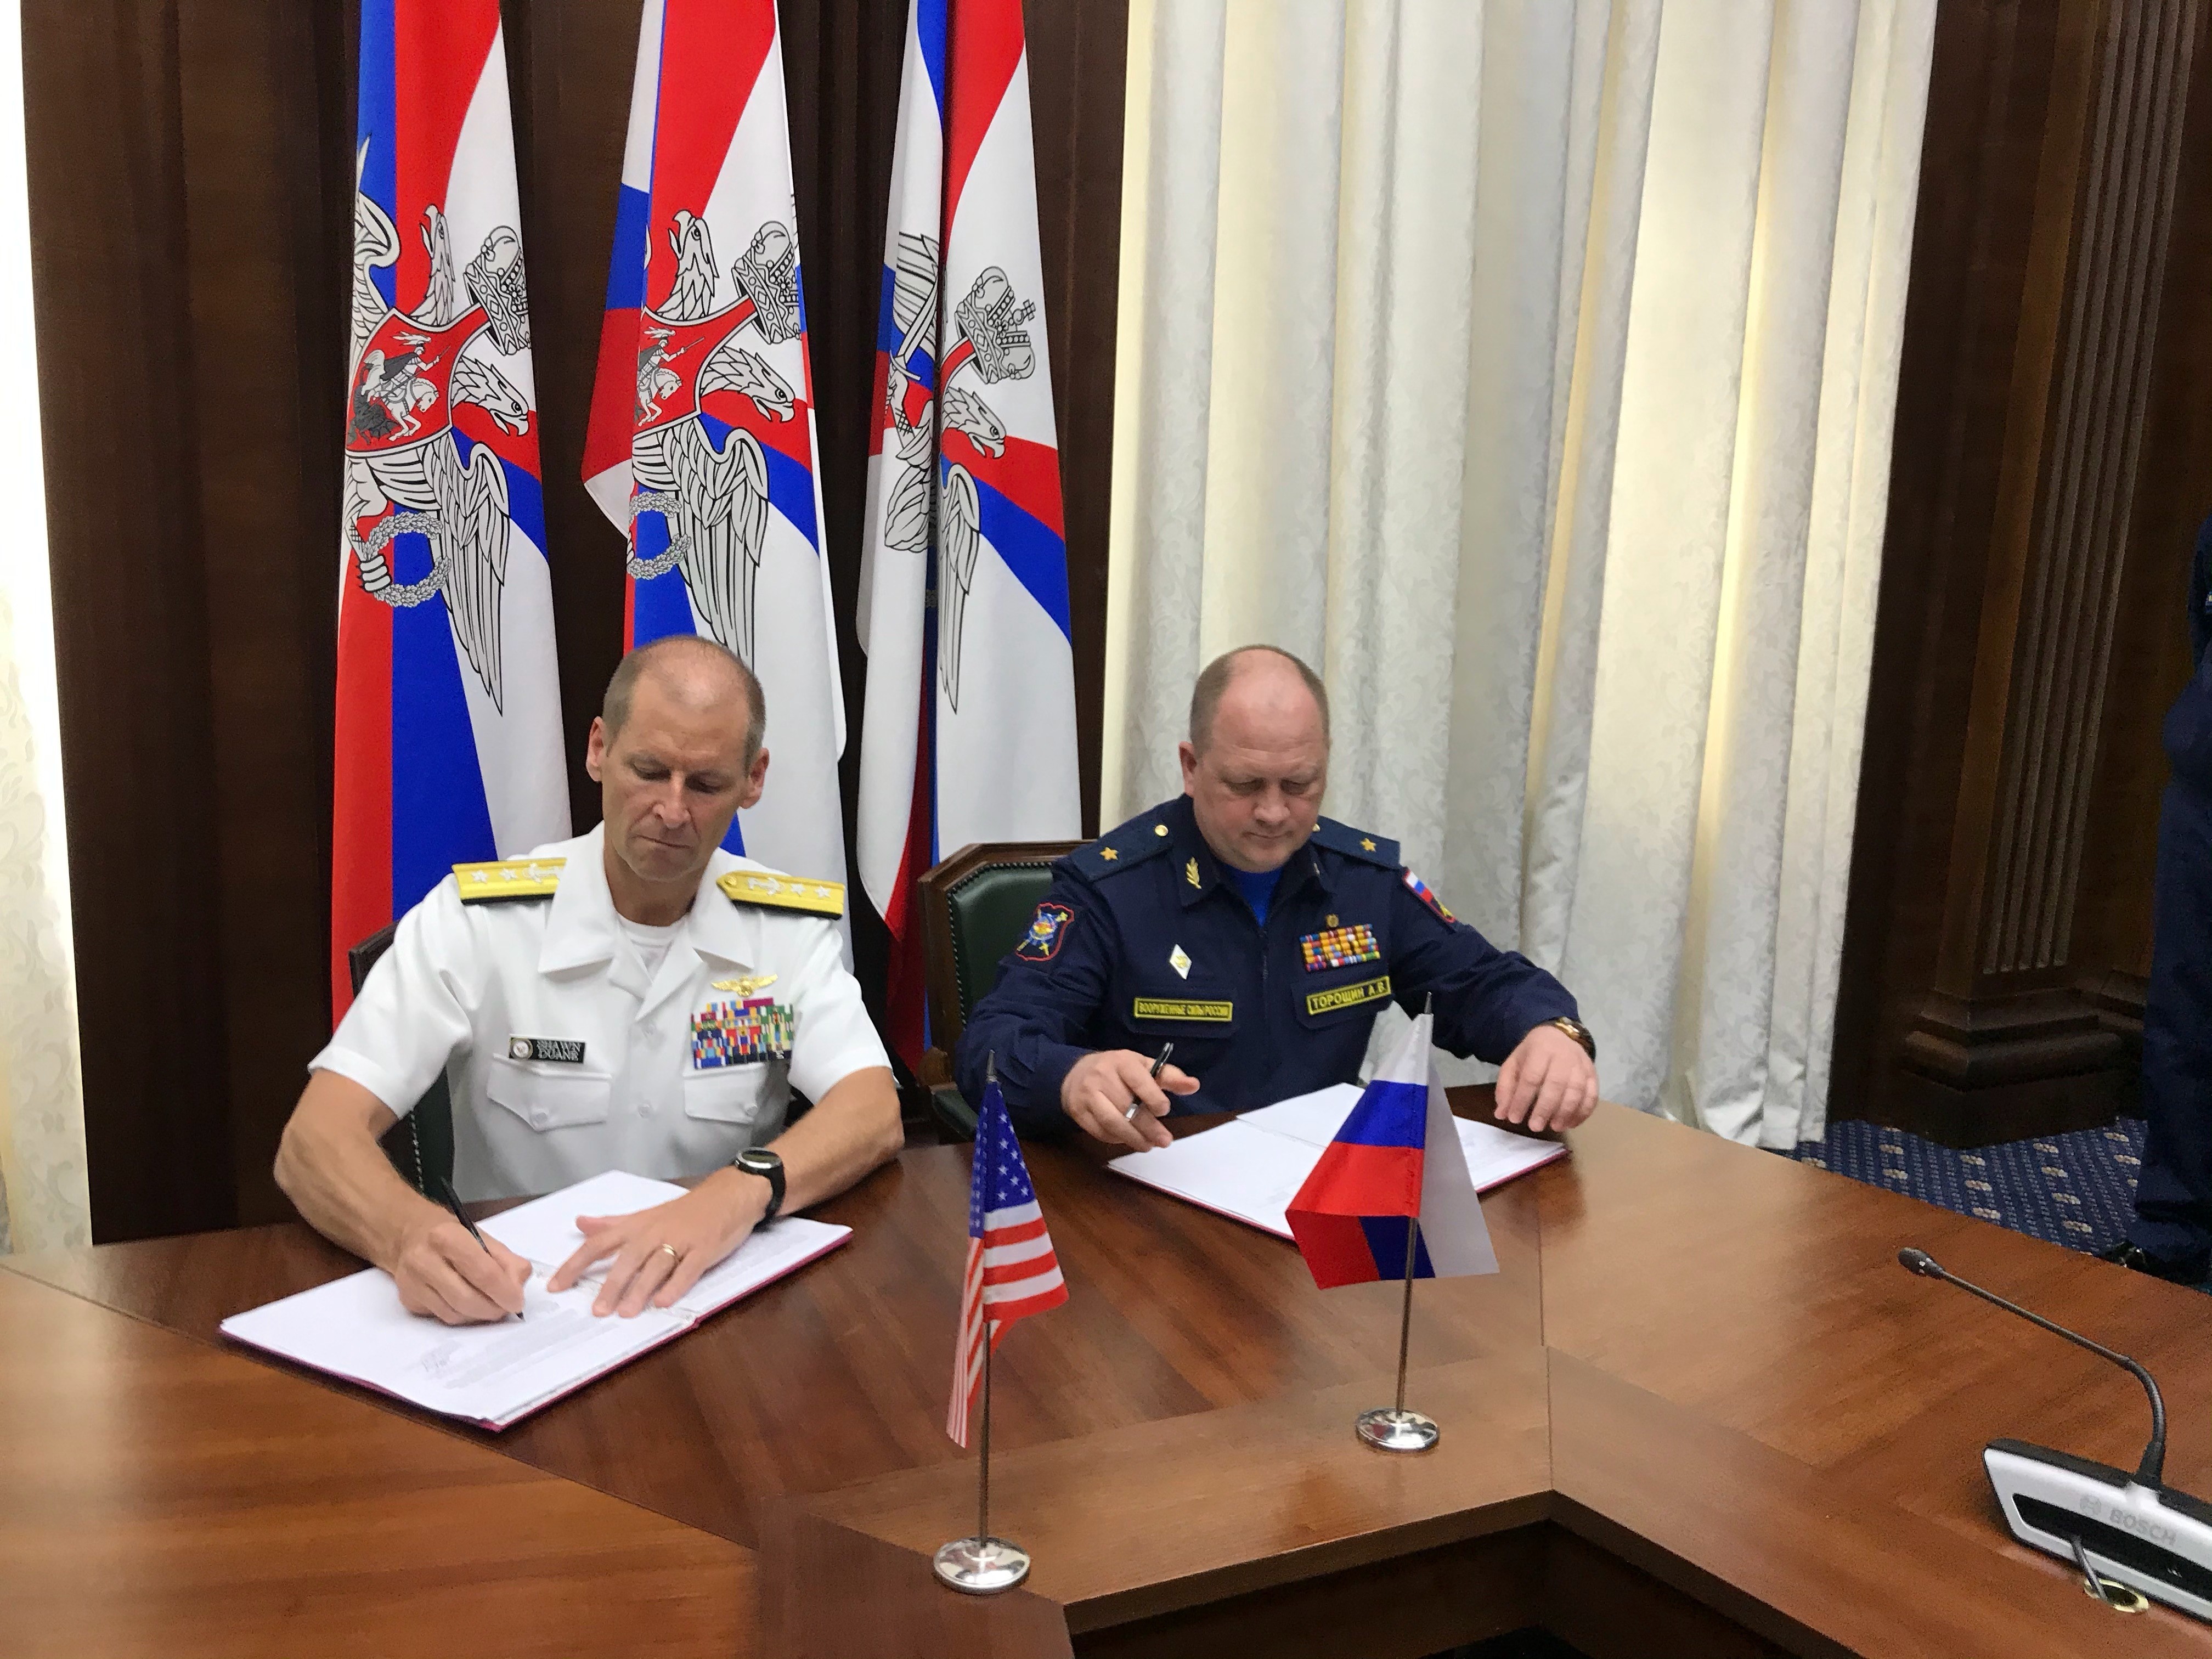  Rear Adm. Shawn Duane, left, head of the U.S. delegation, shakes hands with his Russian counterpart after signing the Prevention of Incidents On and Over the Waters Outside the Limits of the Territorial Sea (INCSEA) agreement in Moscow, May 25, 2021. 